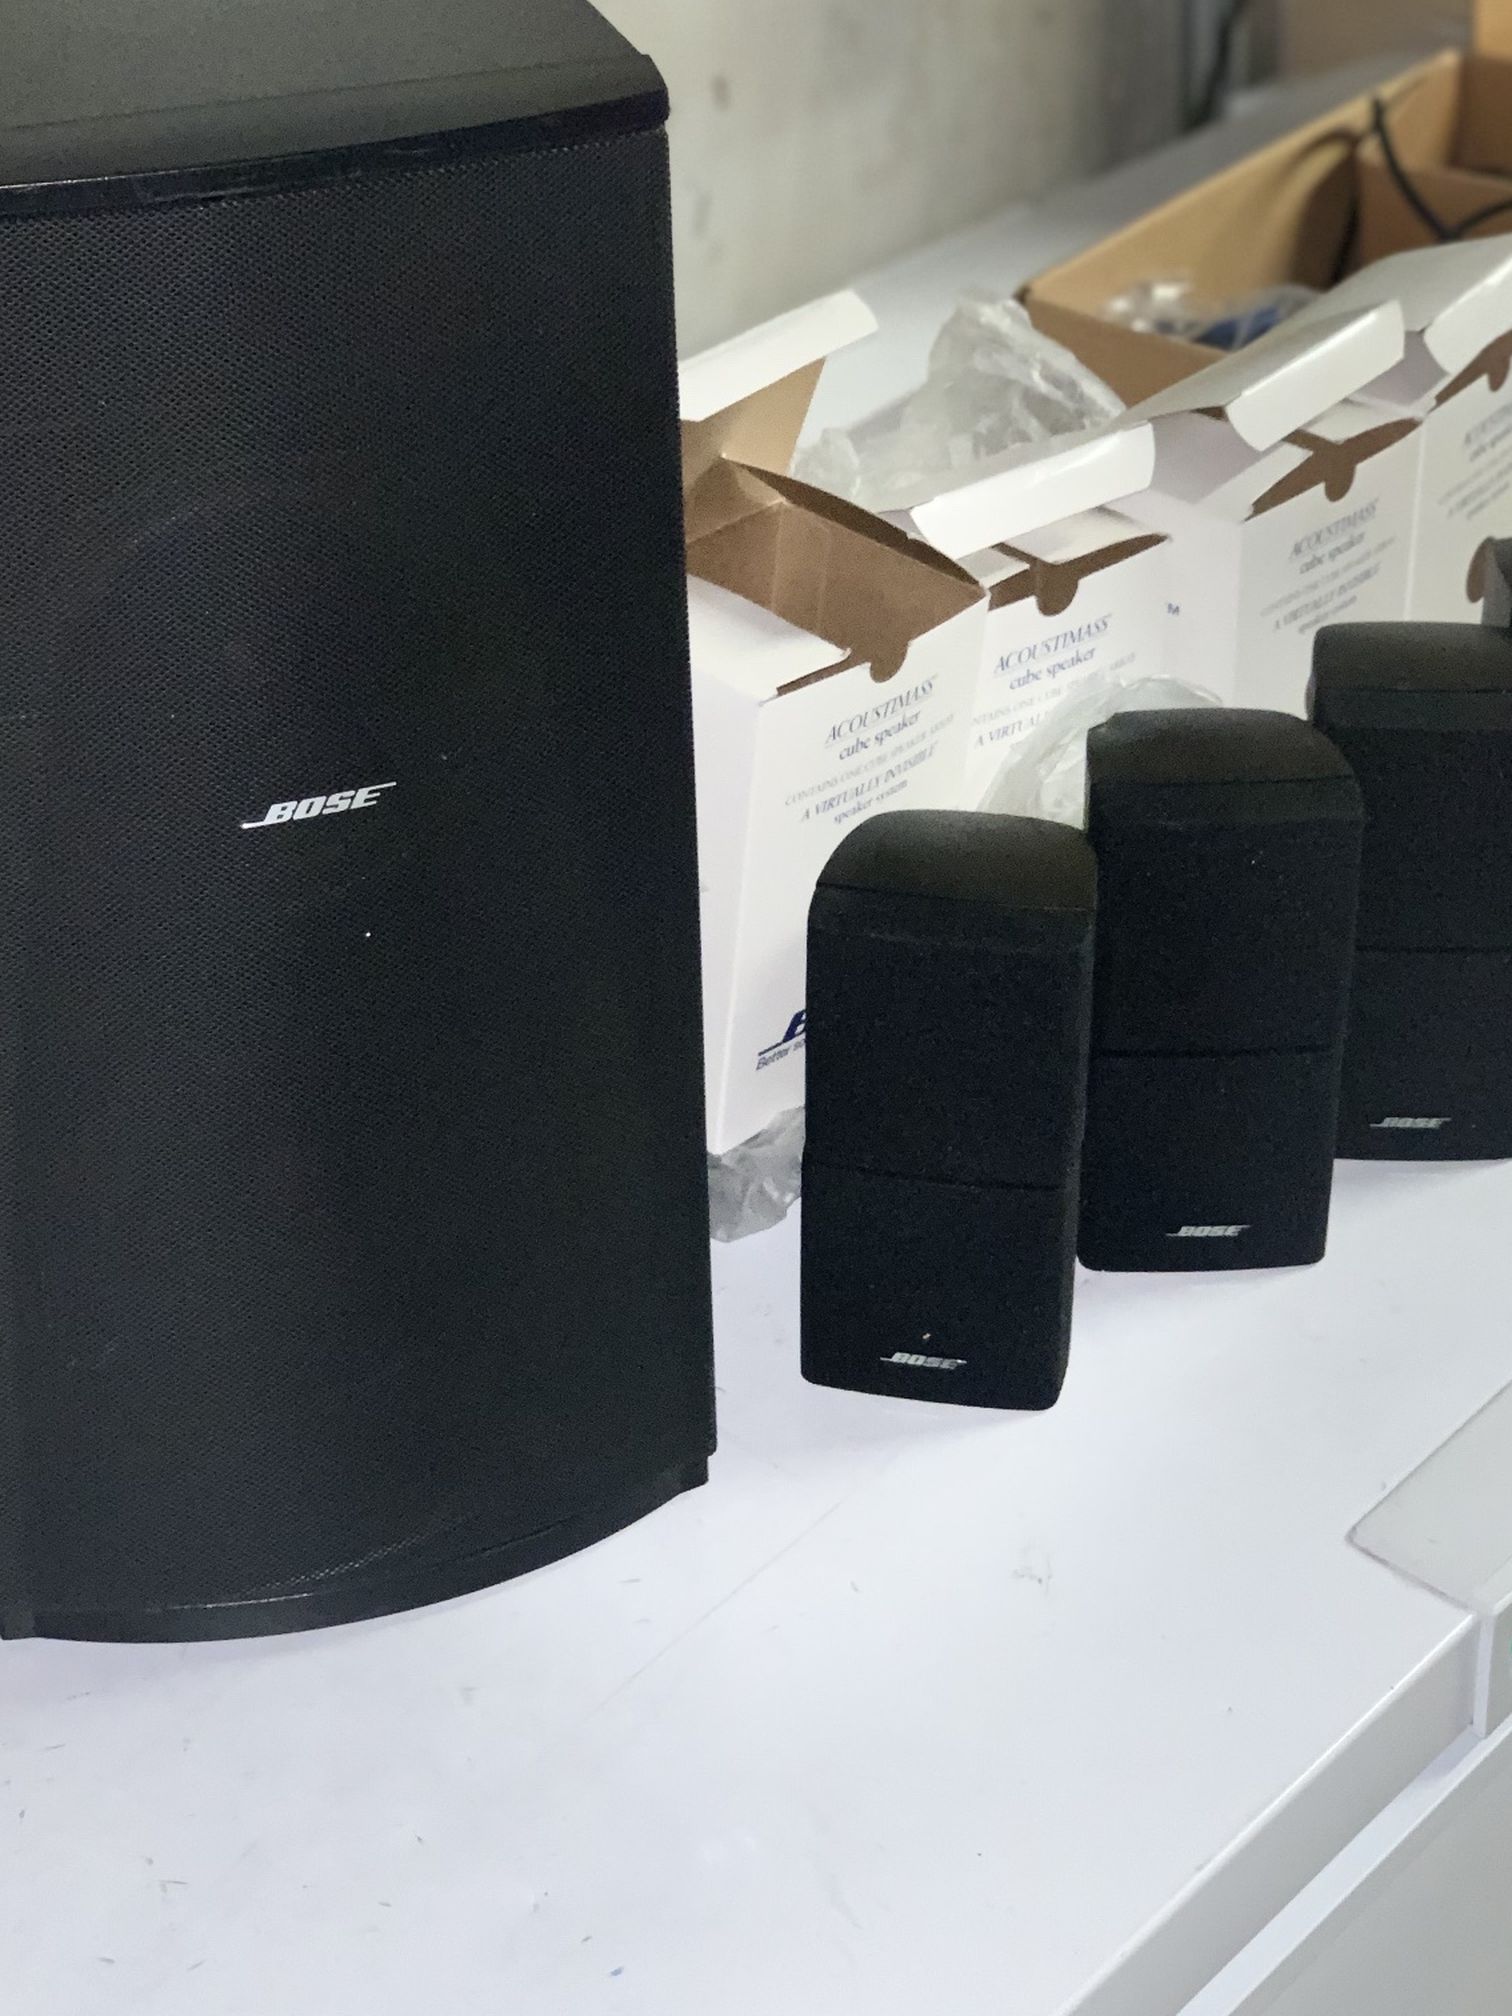 4 Brand New/Unused In Original Packaging Bose Double Cube Mint Speakers Acoustimass Lifestyle Black 1 PS28 Subwoofer Unused Not In Original Packaging